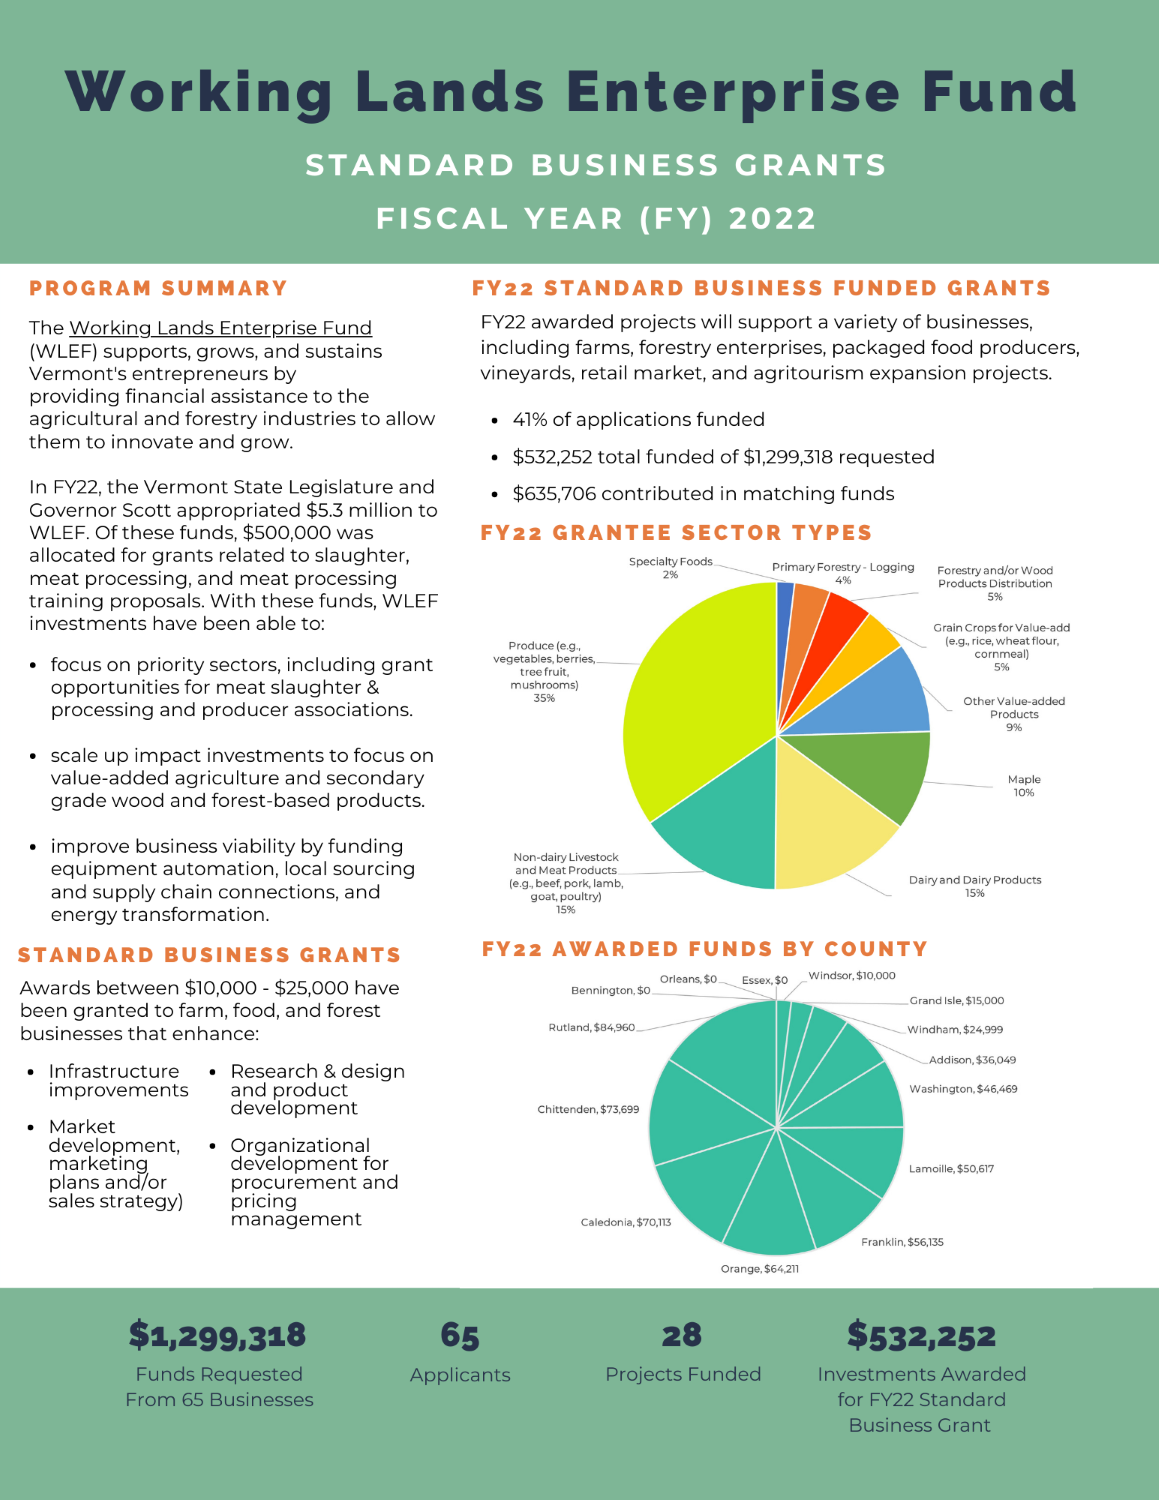 Infographic displaying information about FY22 Standard Business Grants